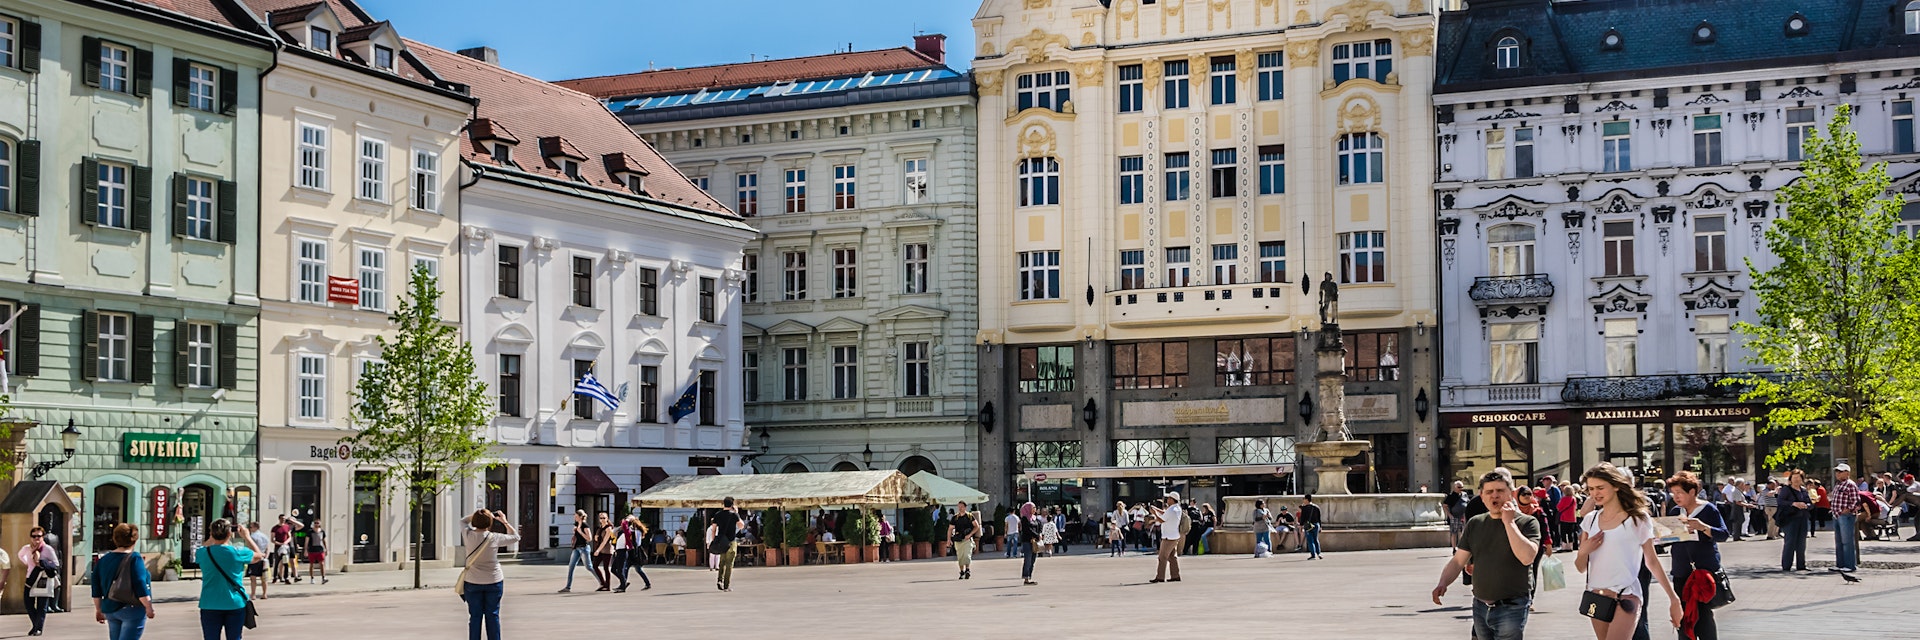 BRATISLAVA, SLOVAKIA - MAY 7, 2016: Main Square of Bratislava (Hlavne namestie) is one of the best known squares in Bratislava. The square is located in the Old Town and it is the center of city.; Shutterstock ID 425043109; Your name (First / Last): Gemma Graham; GL account no.: 65050; Netsuite department name: Online Editorial; Full Product or Project name including edition: Cities Guides app image downloads - Bratislava